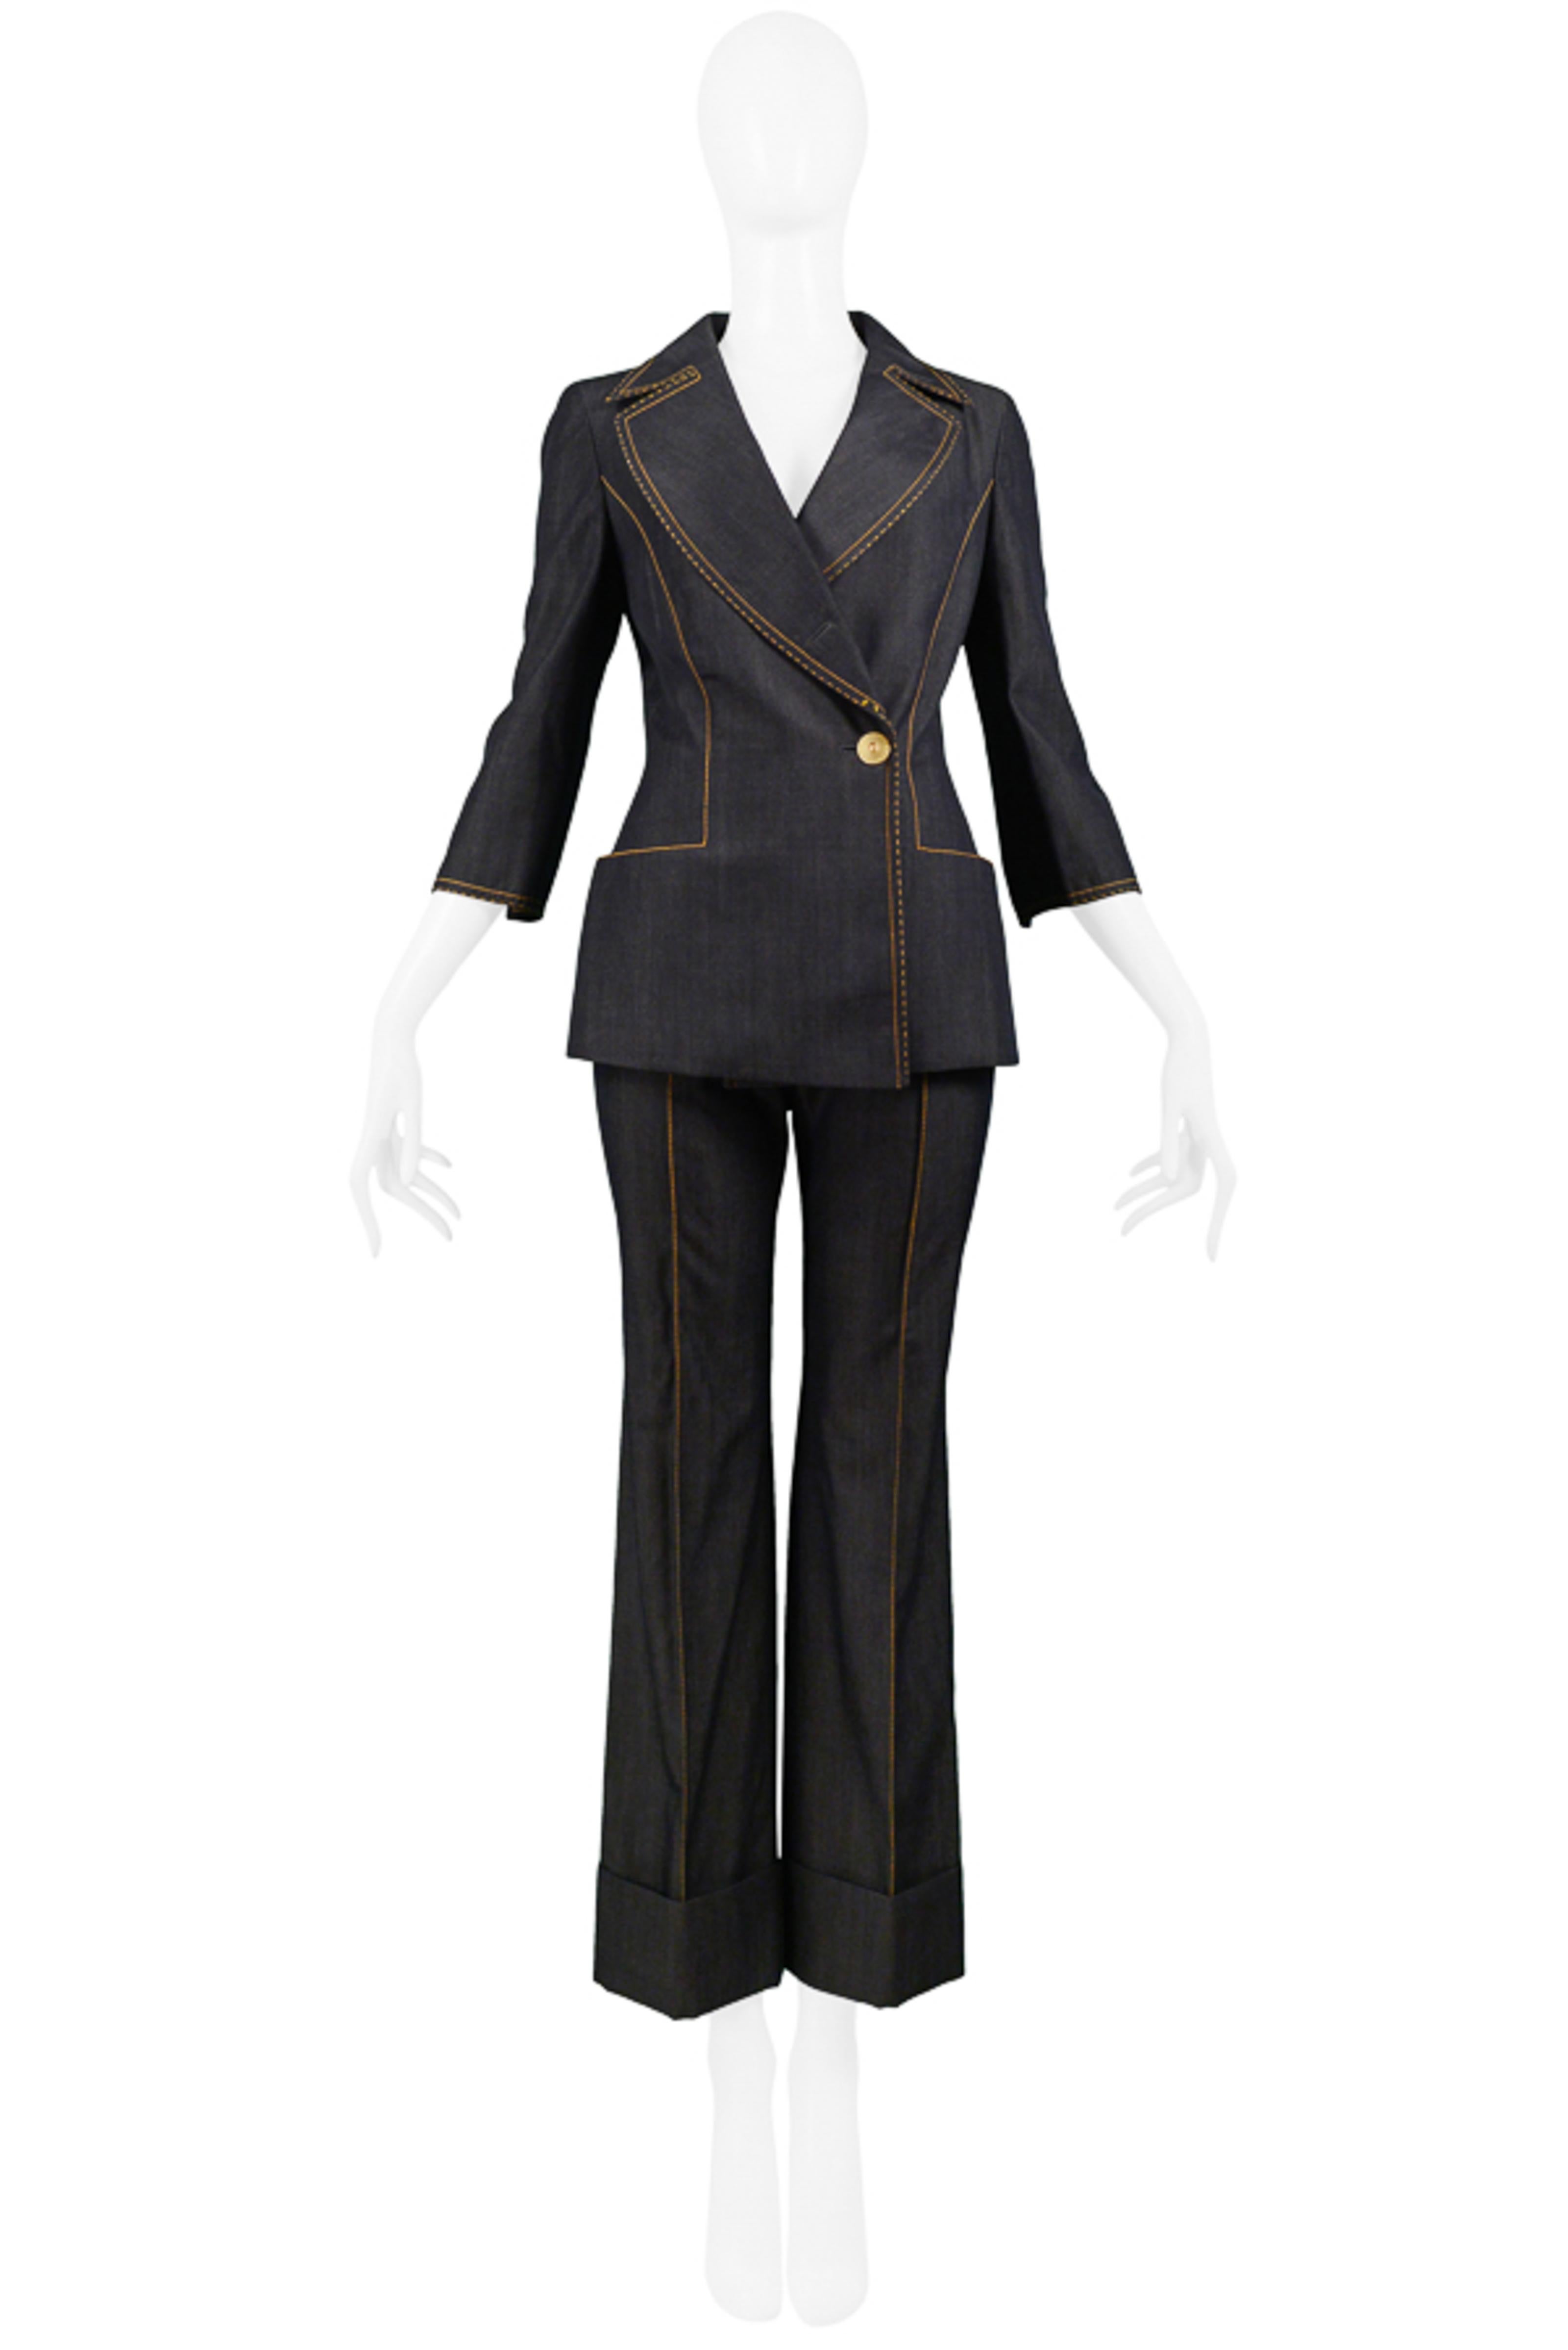 Resurrection Vintage is excited to offer a vintage Gianfranco Ferre denim-inspired suit featuring charcoal gray wool fabric, contrasting yellow stitching, a fitted blazer with asymmetrical button closure, 3/4 sleeves, notch collar with wide lapels,